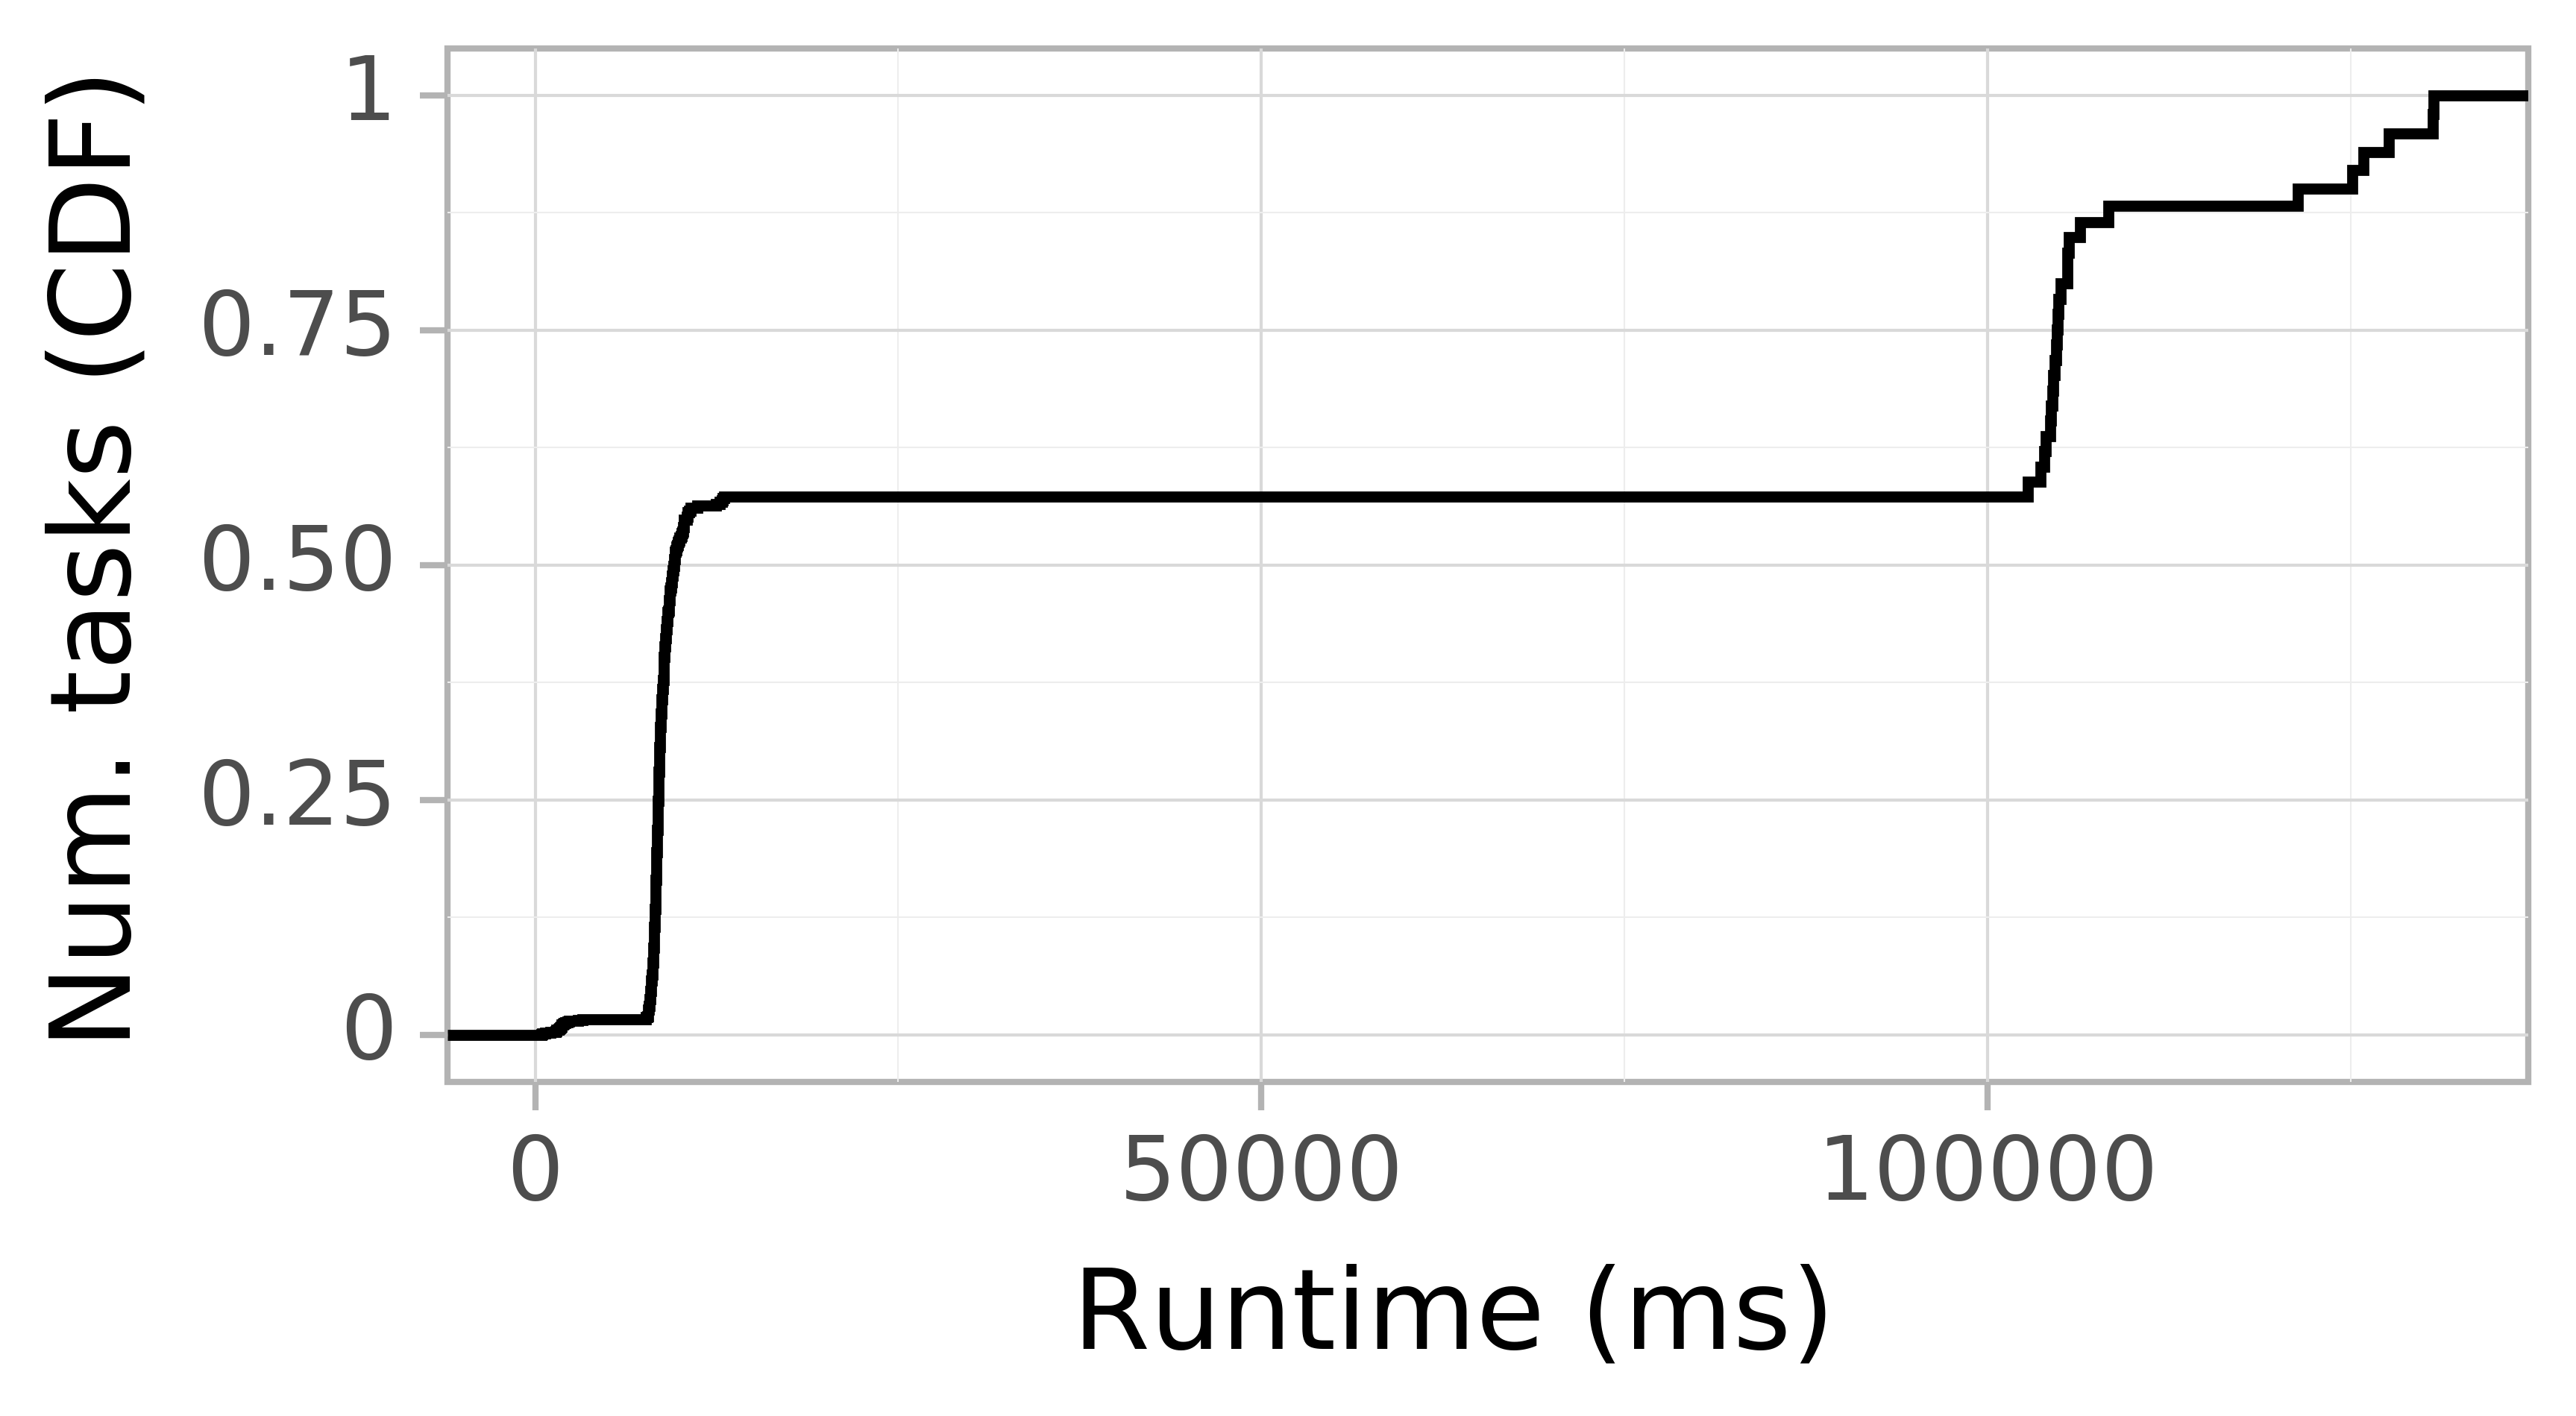 Task runtime CDF graph for the askalon-new_ee27 trace.